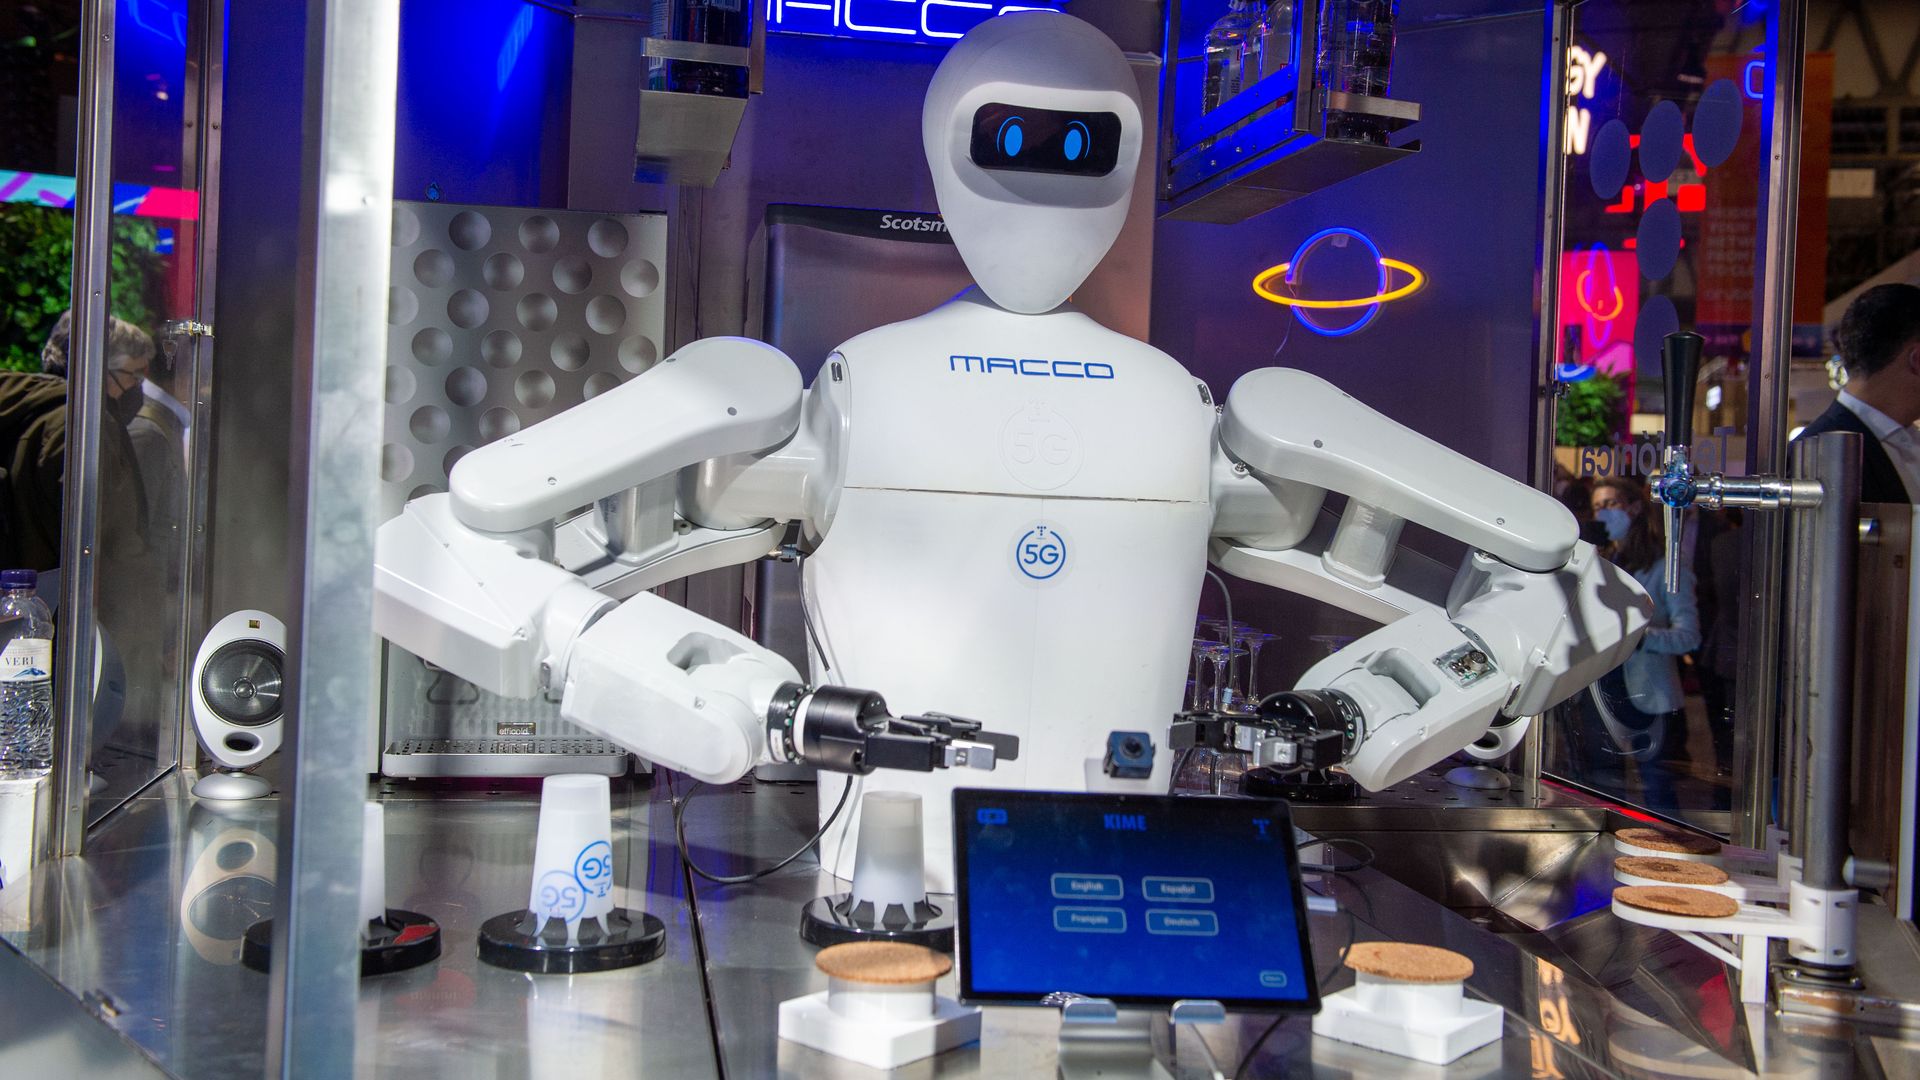 A robot bartender serves drinks at a trade conference